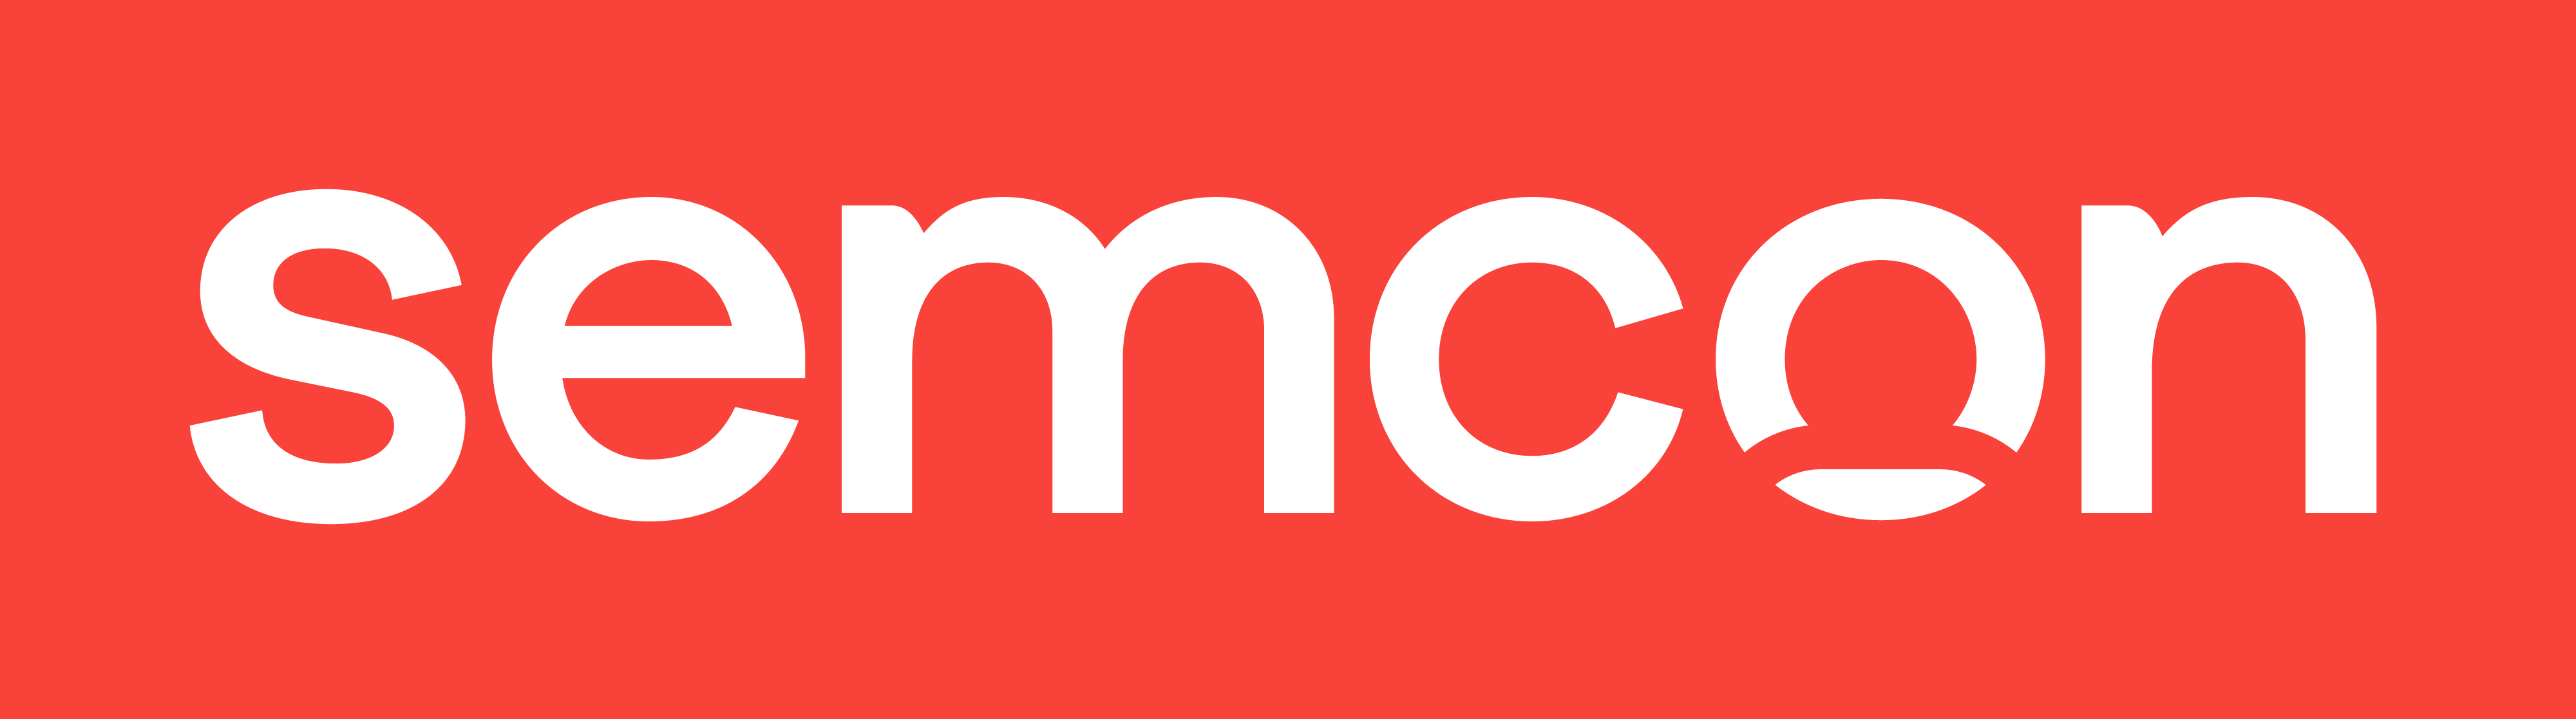 company logo, red background, white letters for semcon